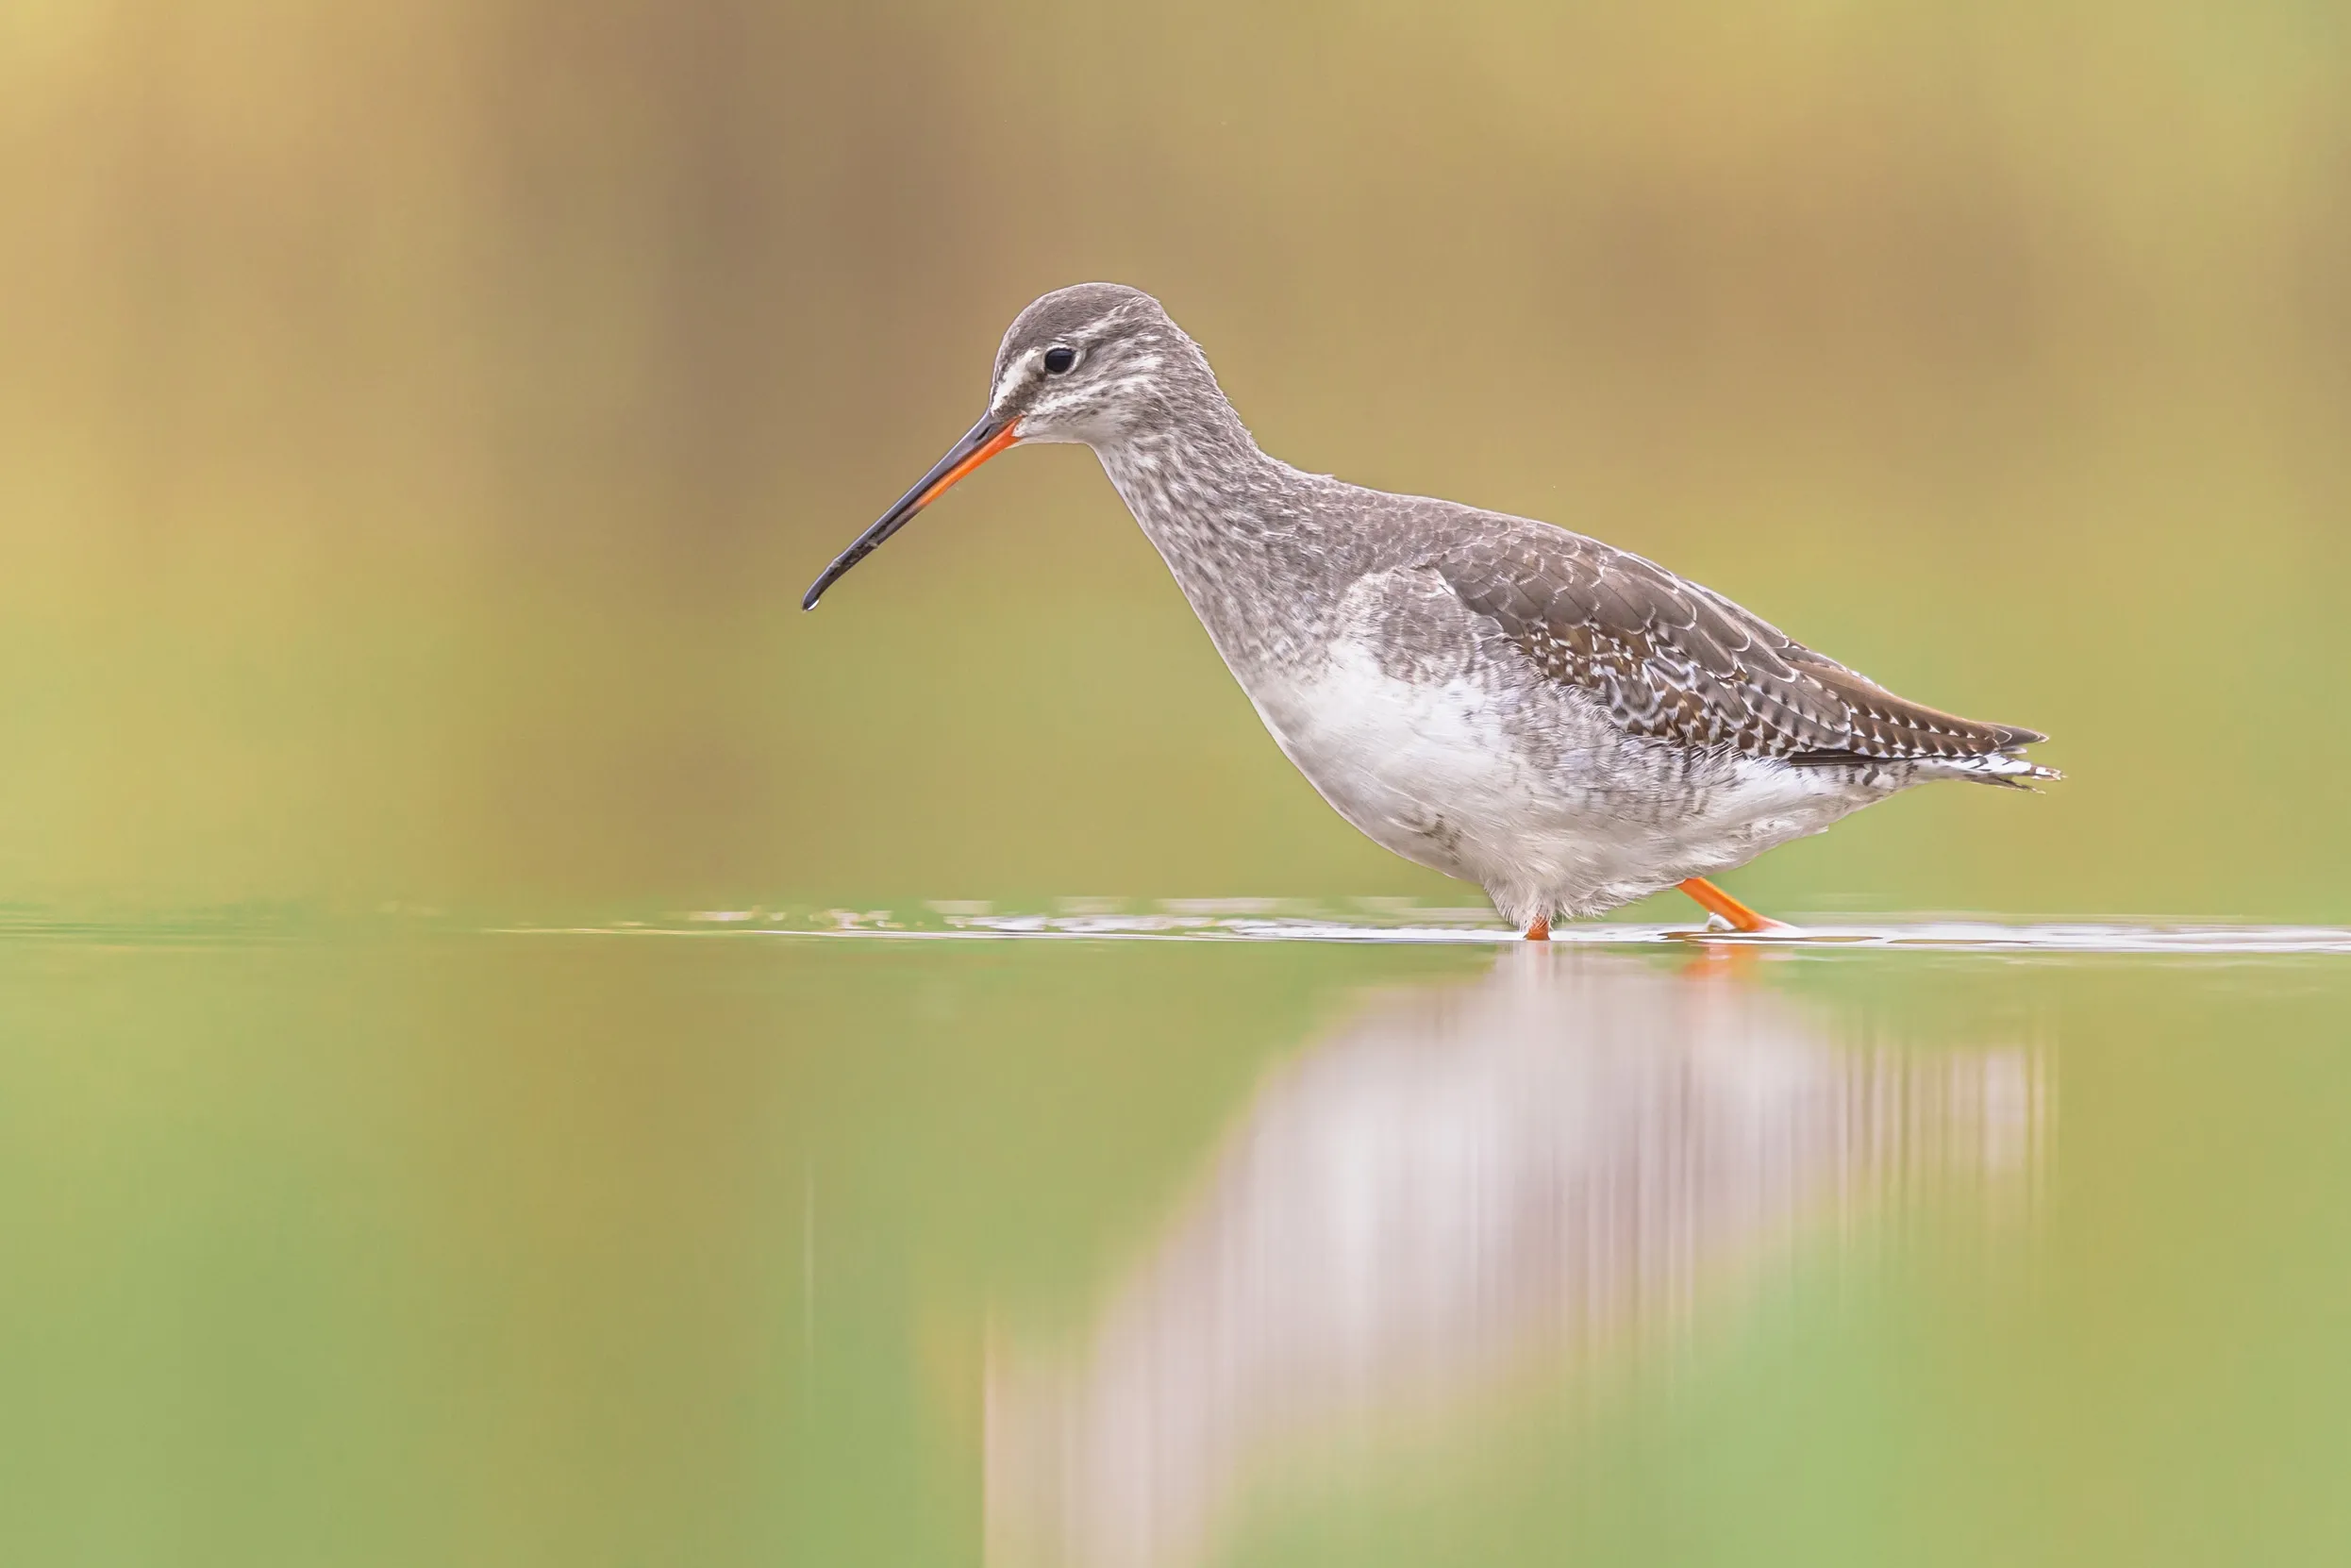 Spotted Redshank in winter plumage, wading through shallow water